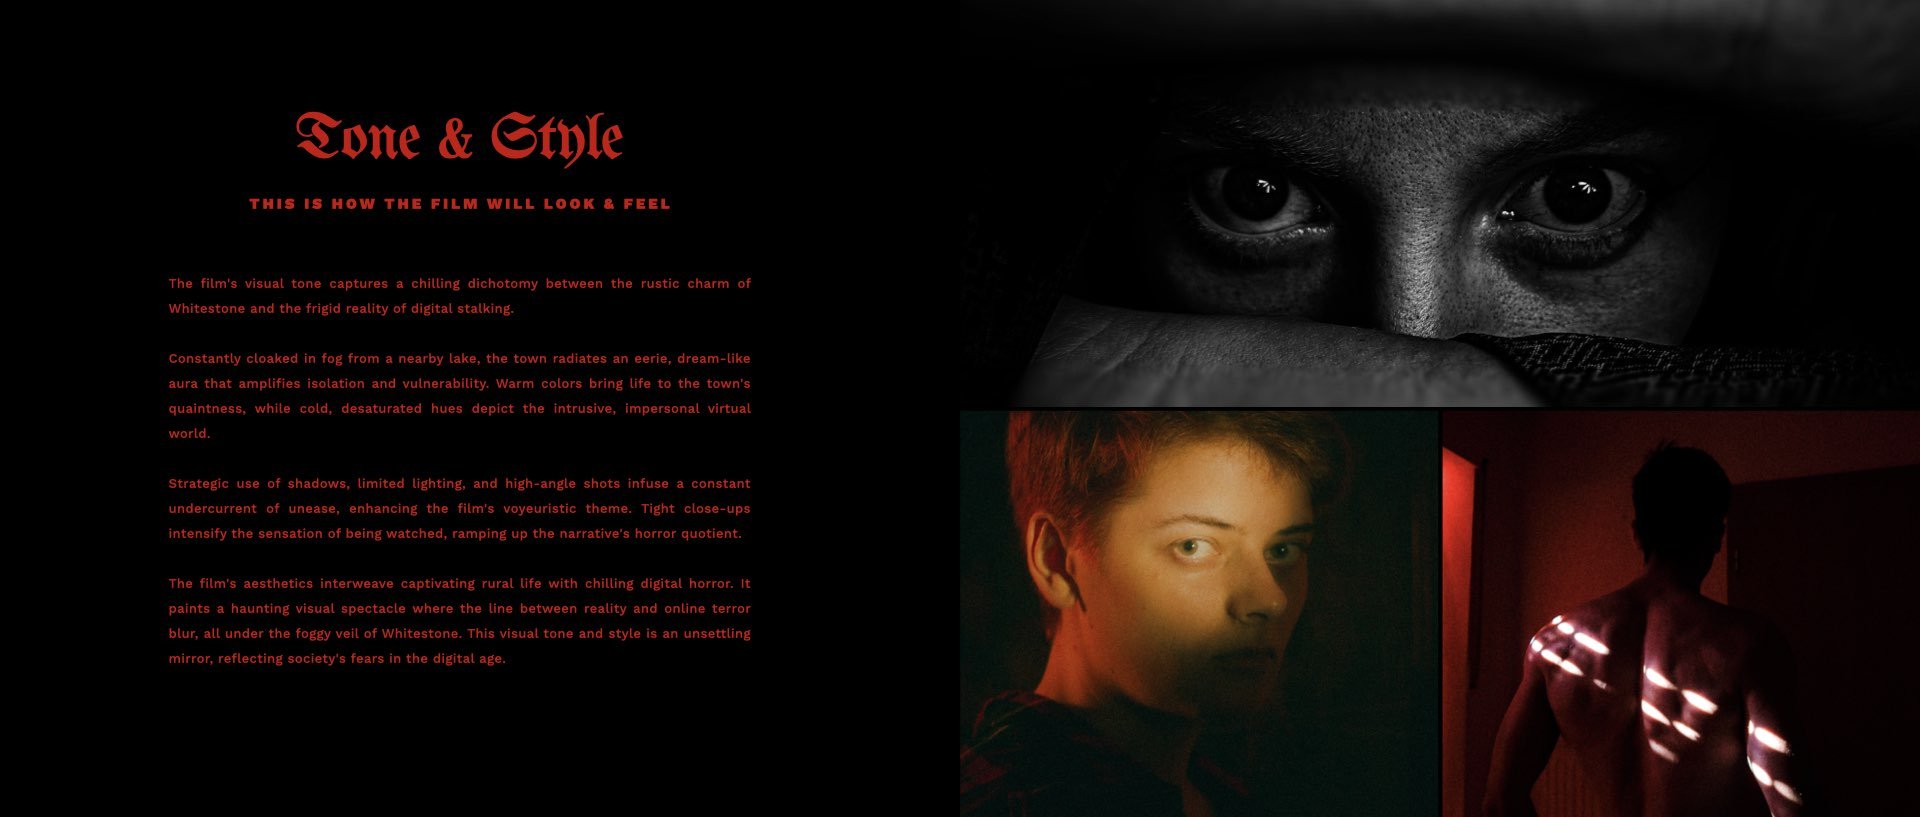 ‎Film Pitch Deck Template - Sinister Obsession.‎024.jpeg